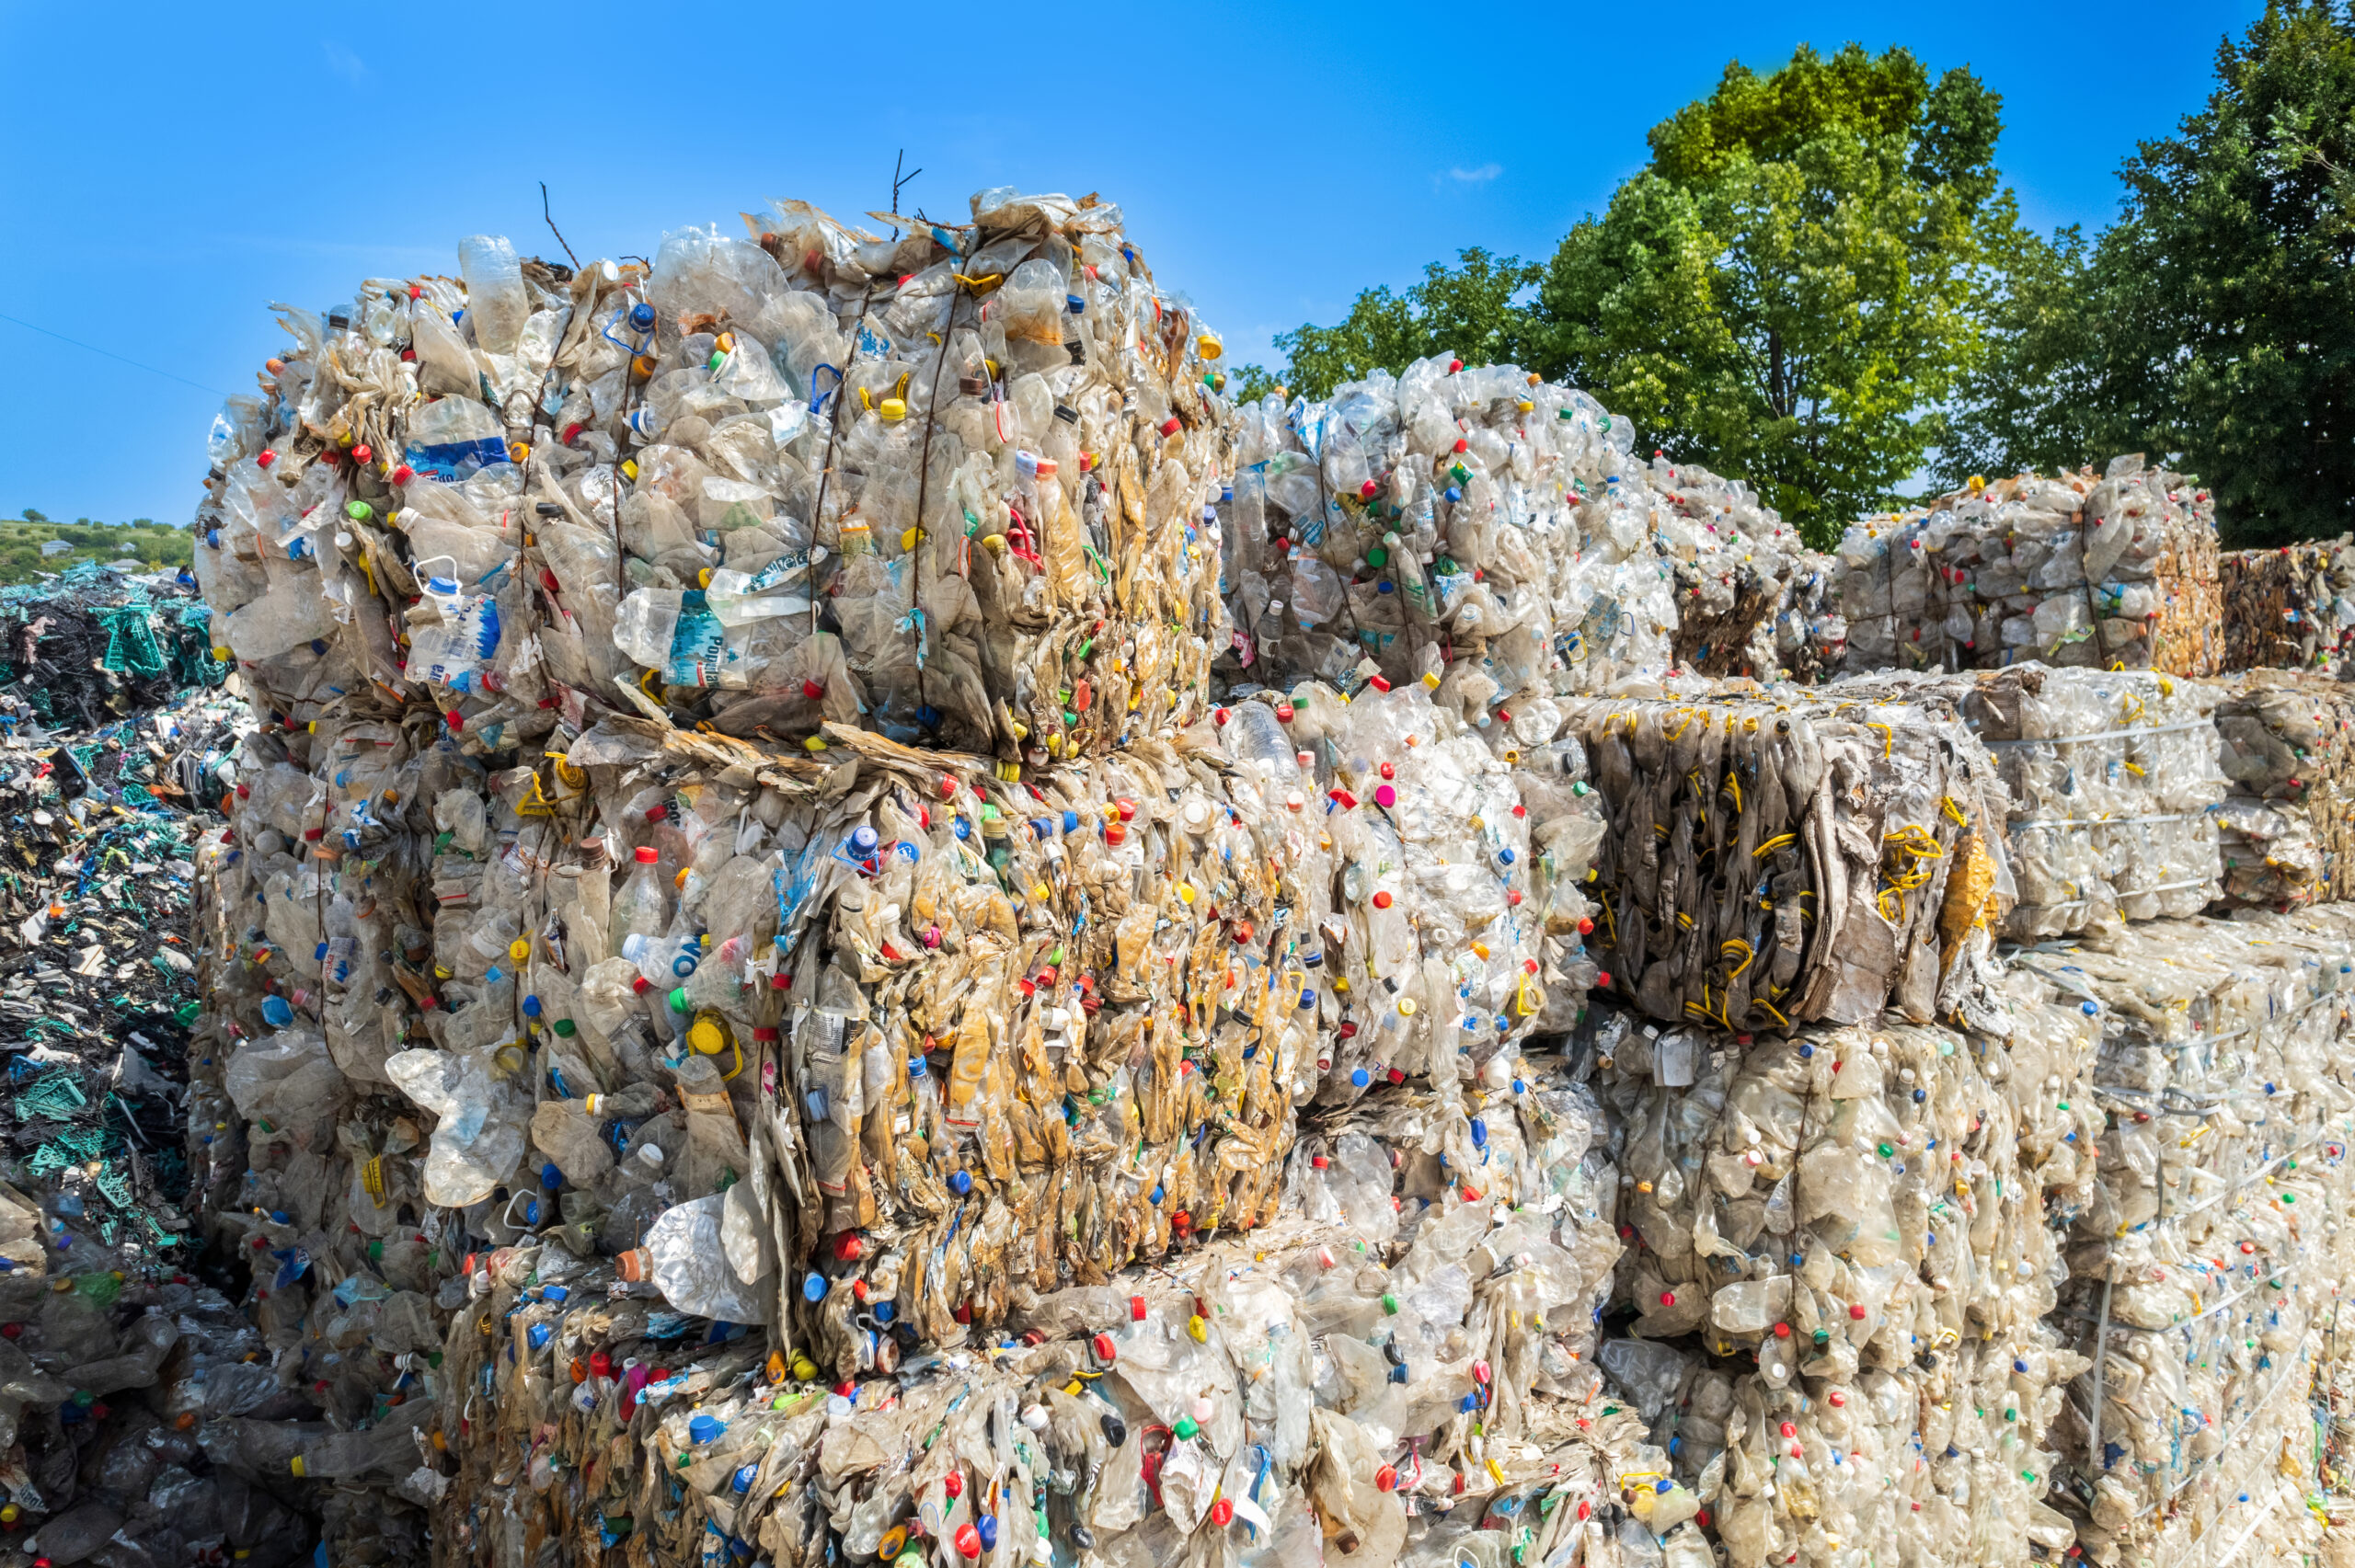 New EU rules to reduce, reuse, and recycle packaging